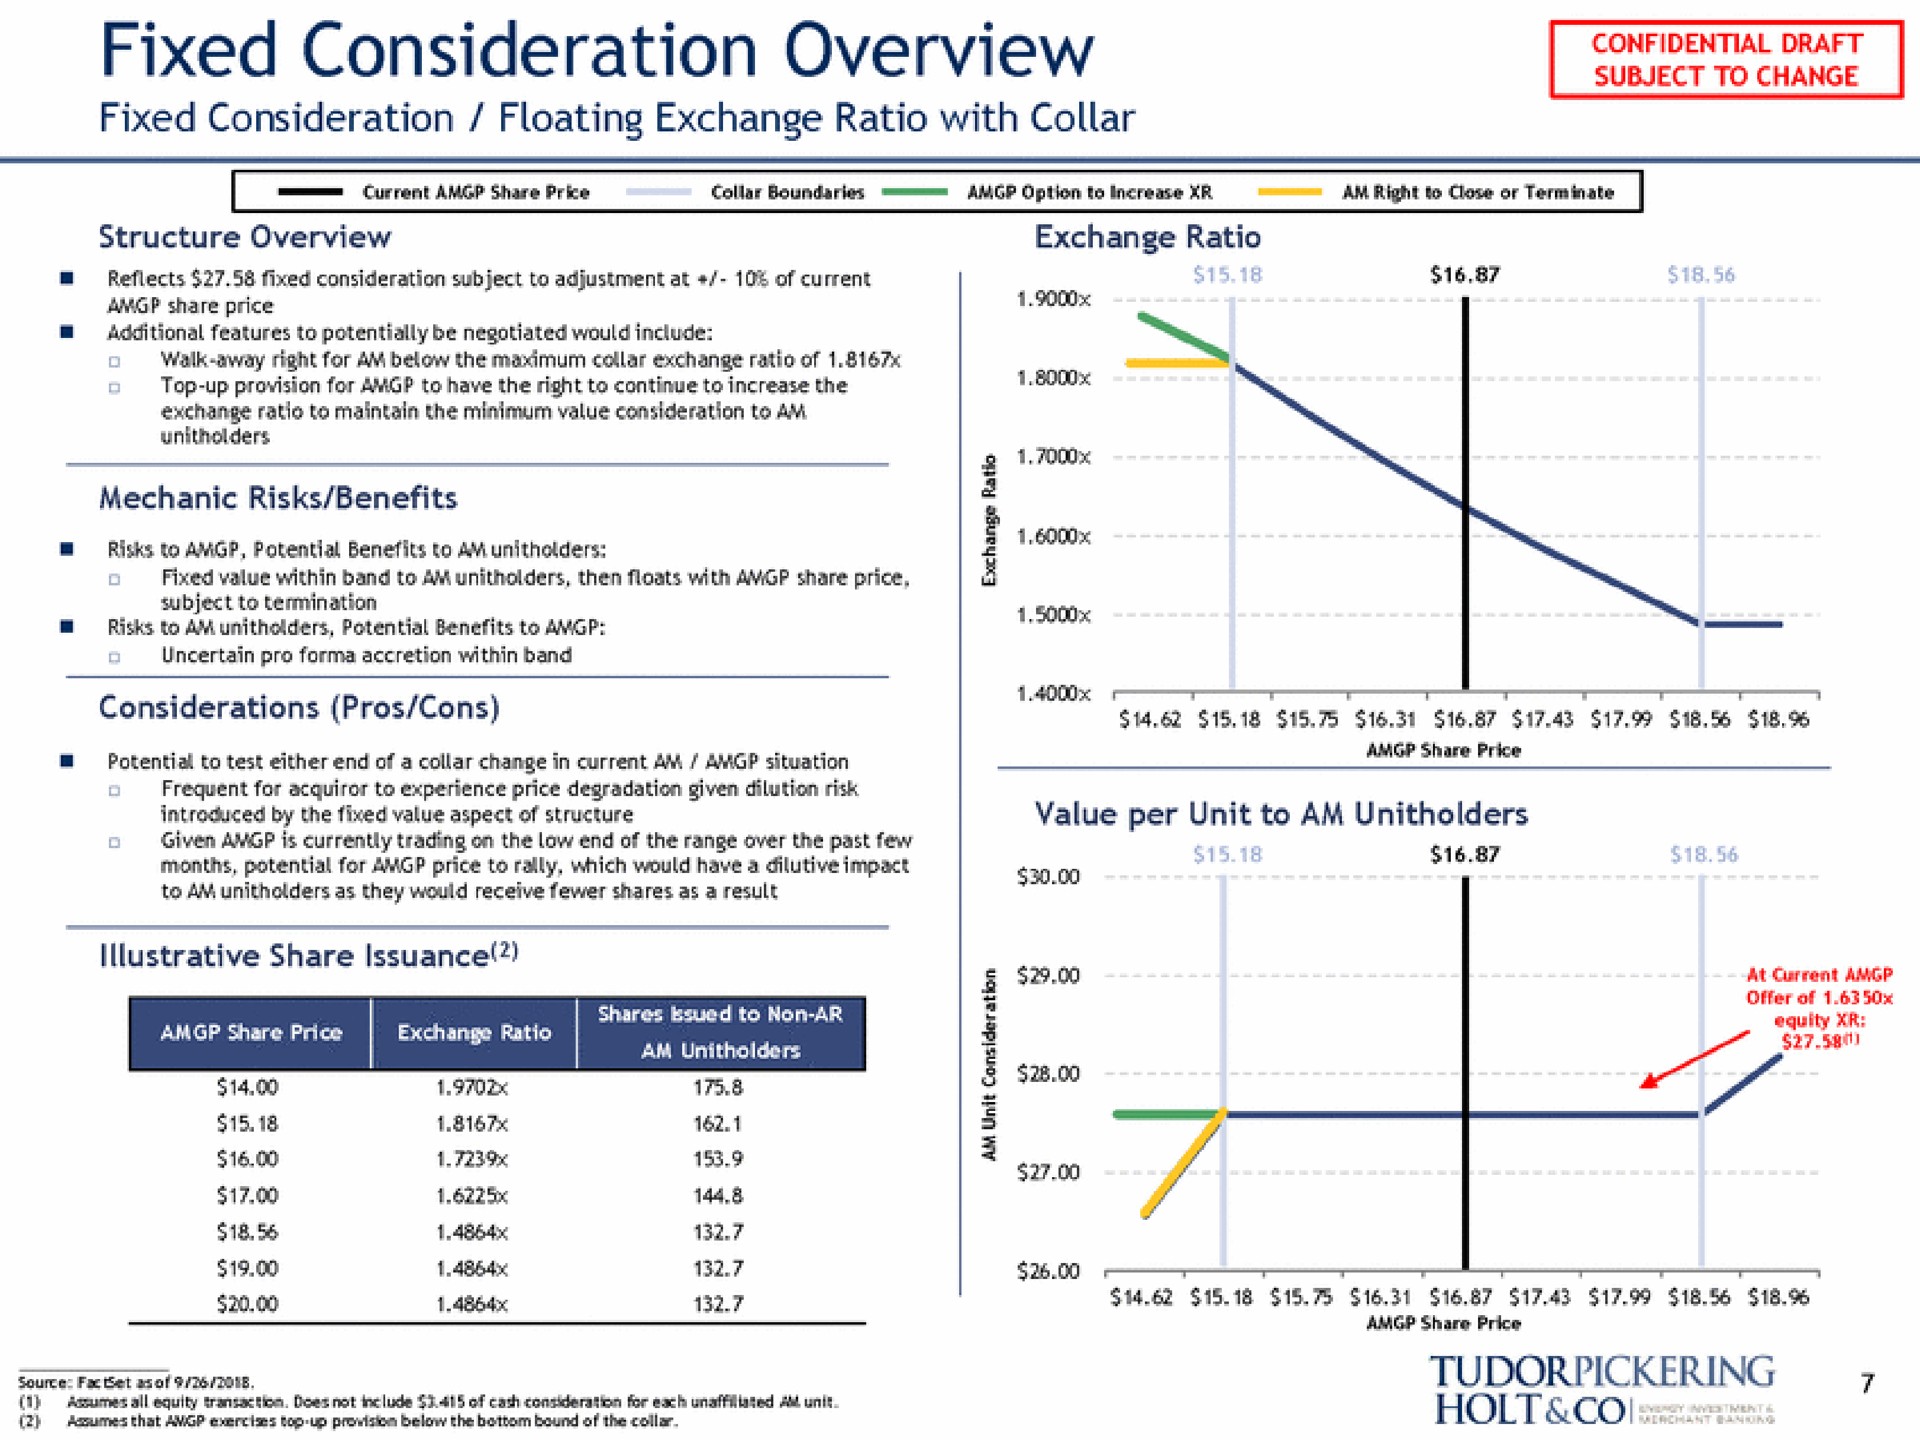 fixed consideration overview fixed consideration floating exchange ratio with collar | Tudor, Pickering, Holt & Co